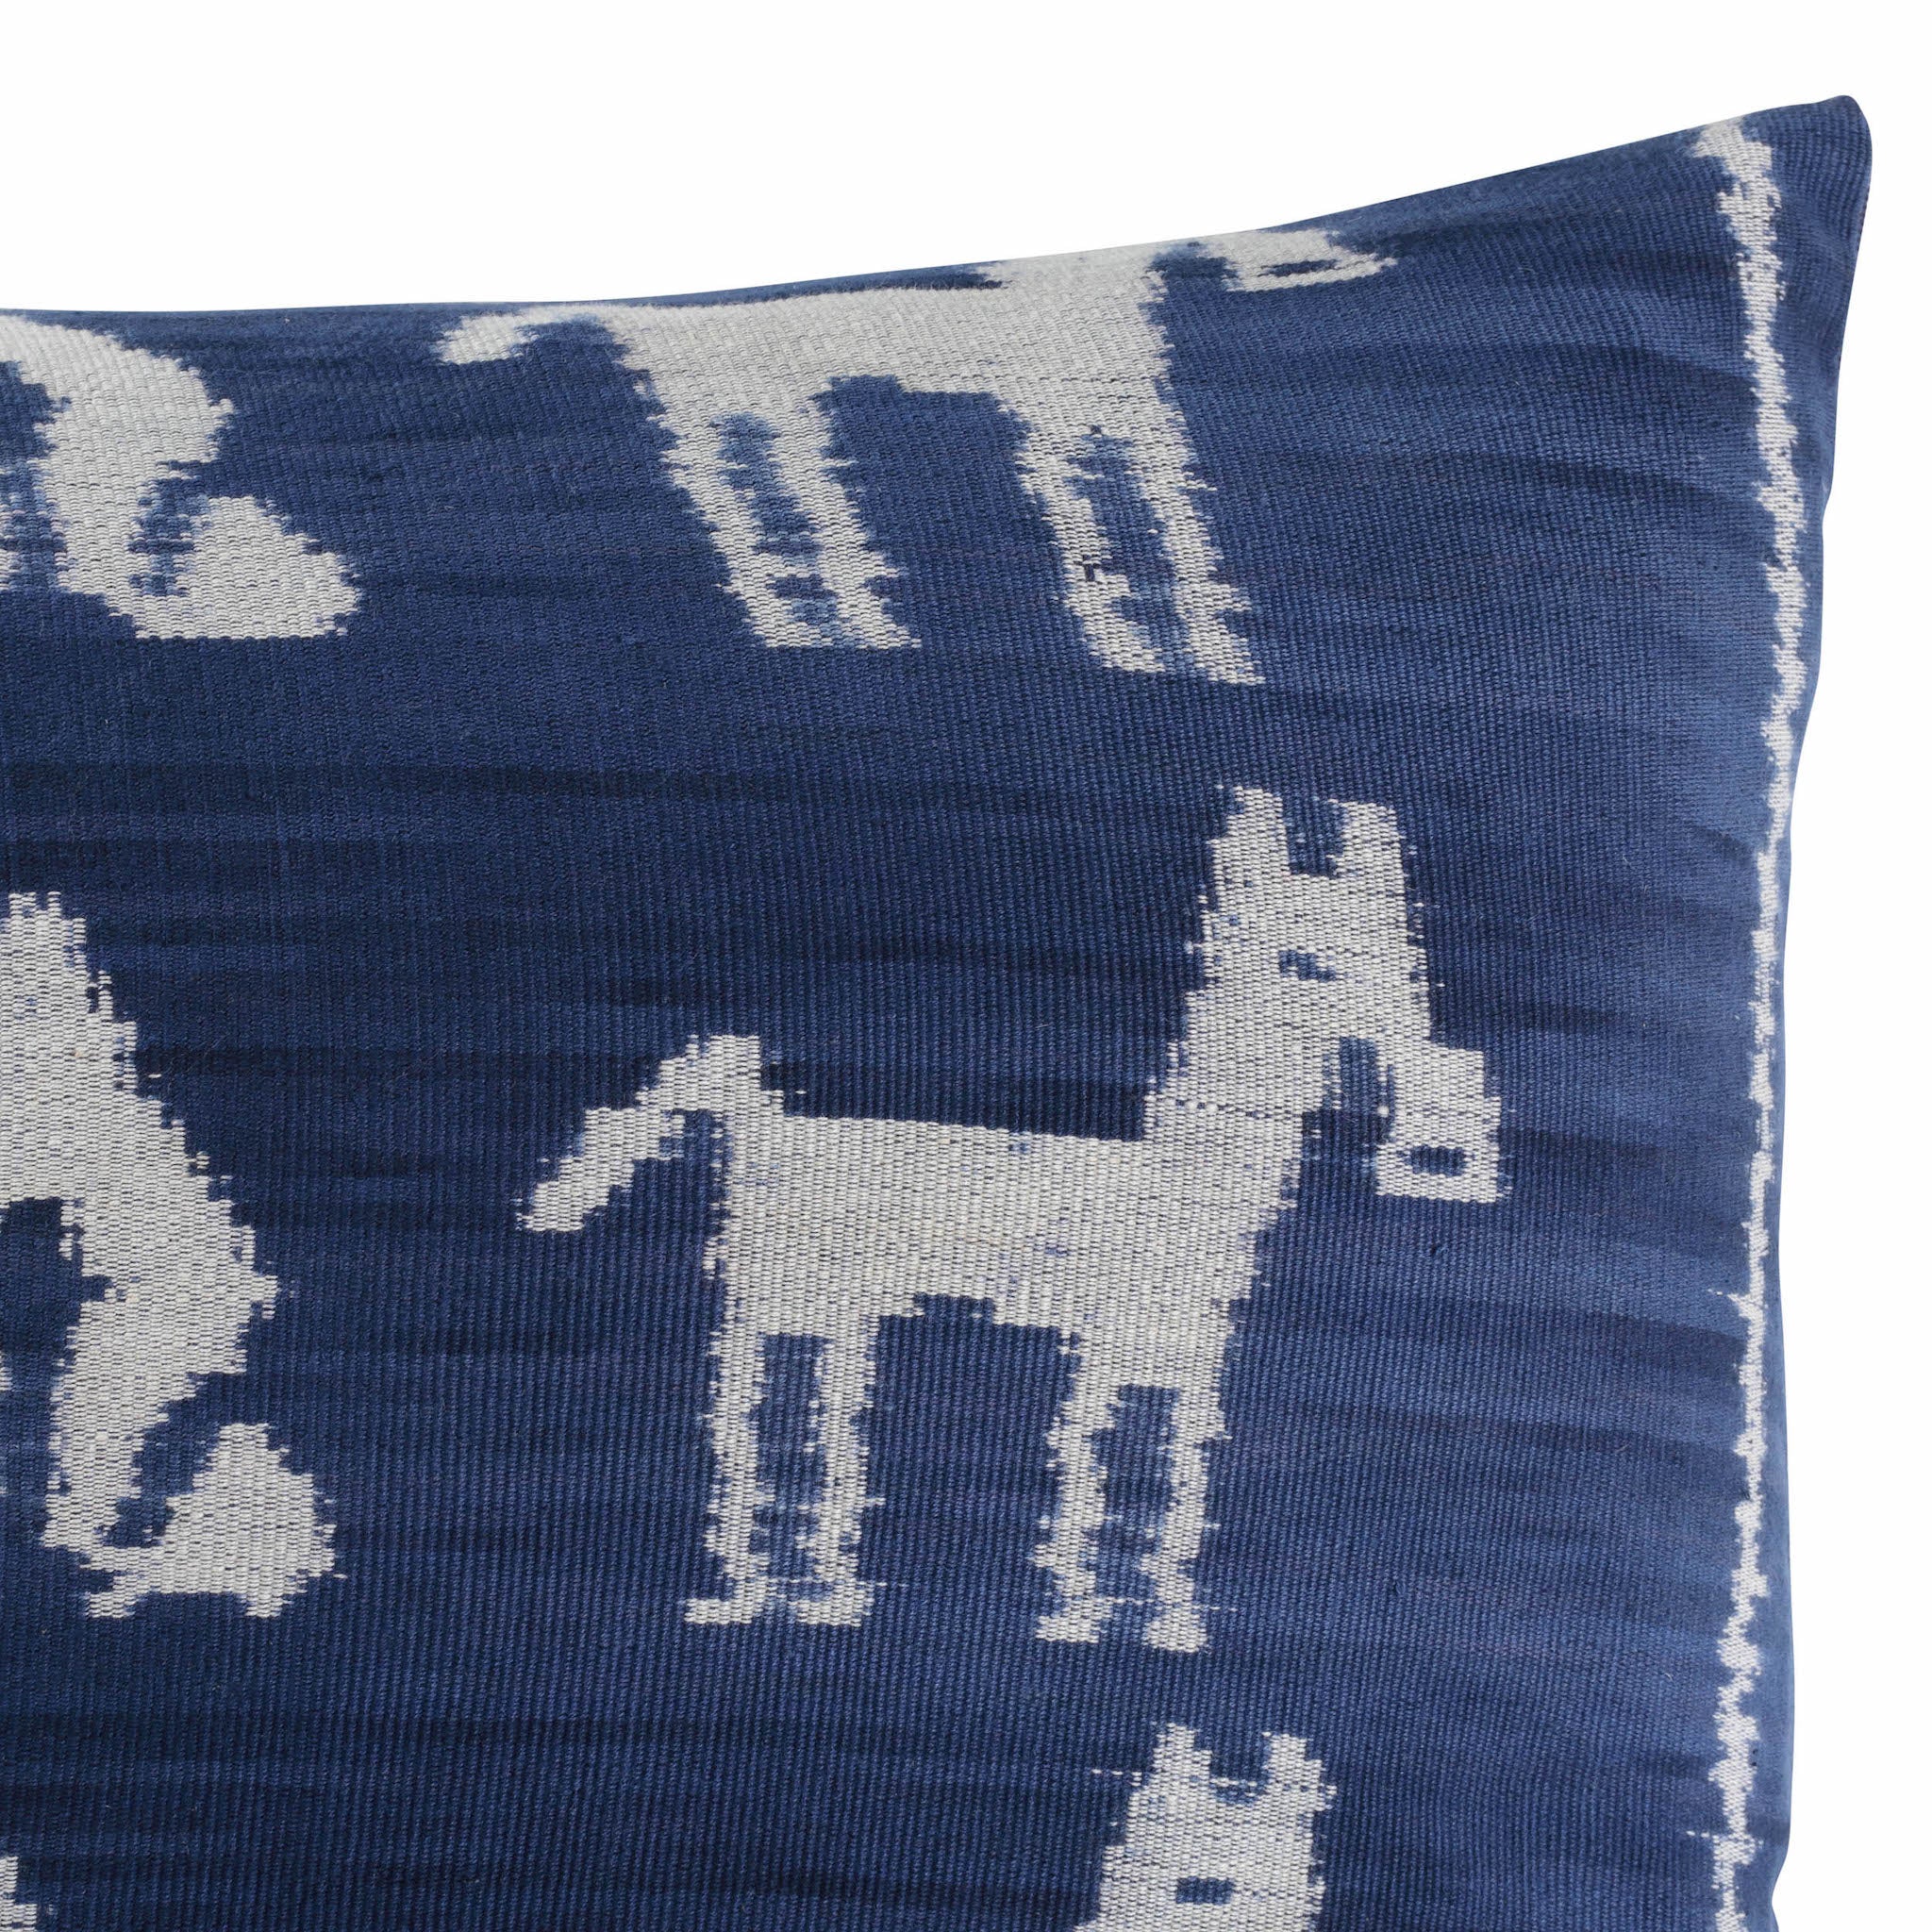 Navy Blue with White Horse and Feminine Symbols Ikat Hand Woven Scatter Rectangle Cushion from Sumba, Indonesia - DETAIL